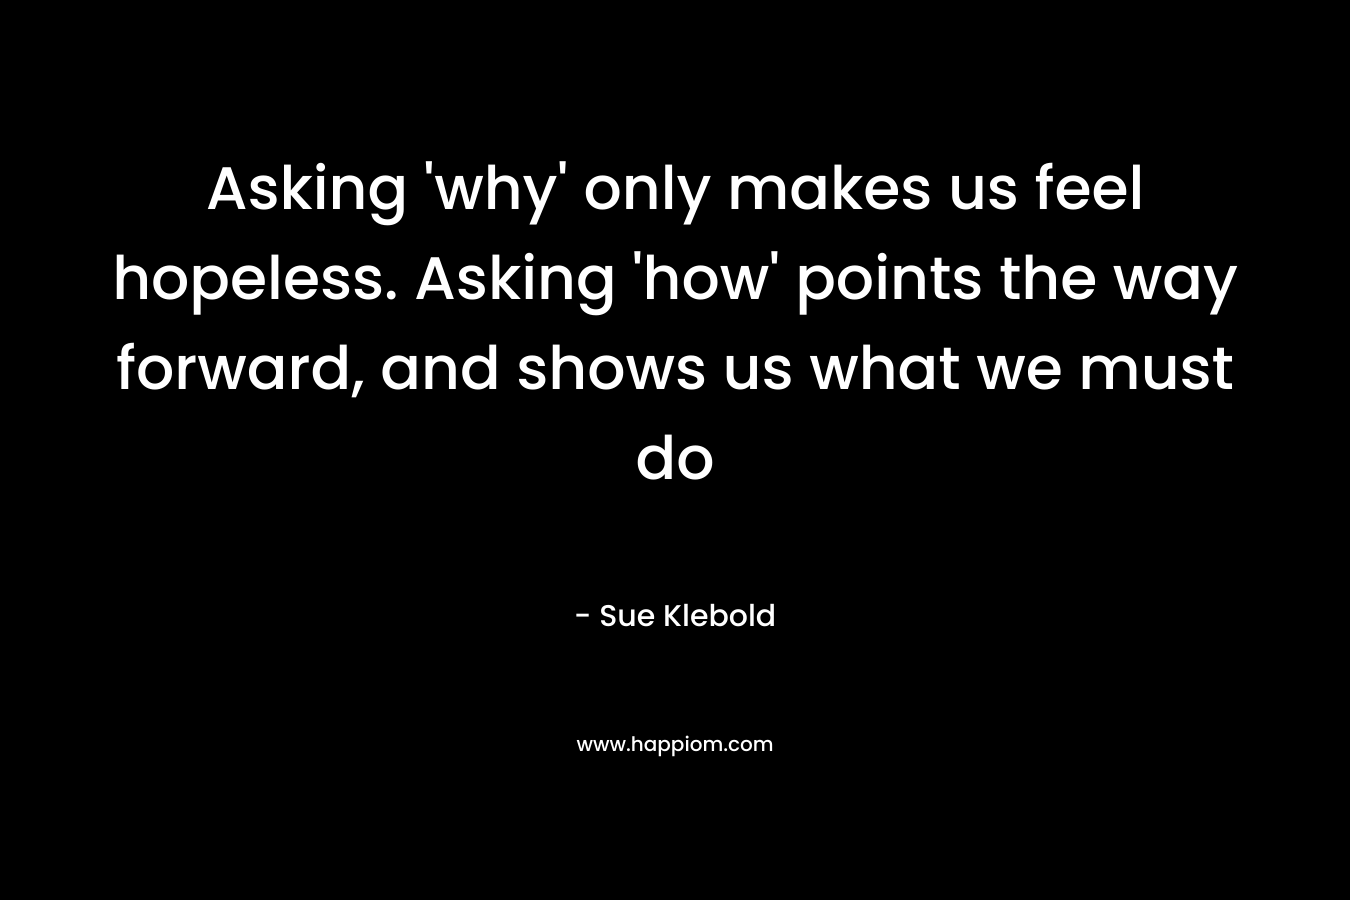 Asking 'why' only makes us feel hopeless. Asking 'how' points the way forward, and shows us what we must do